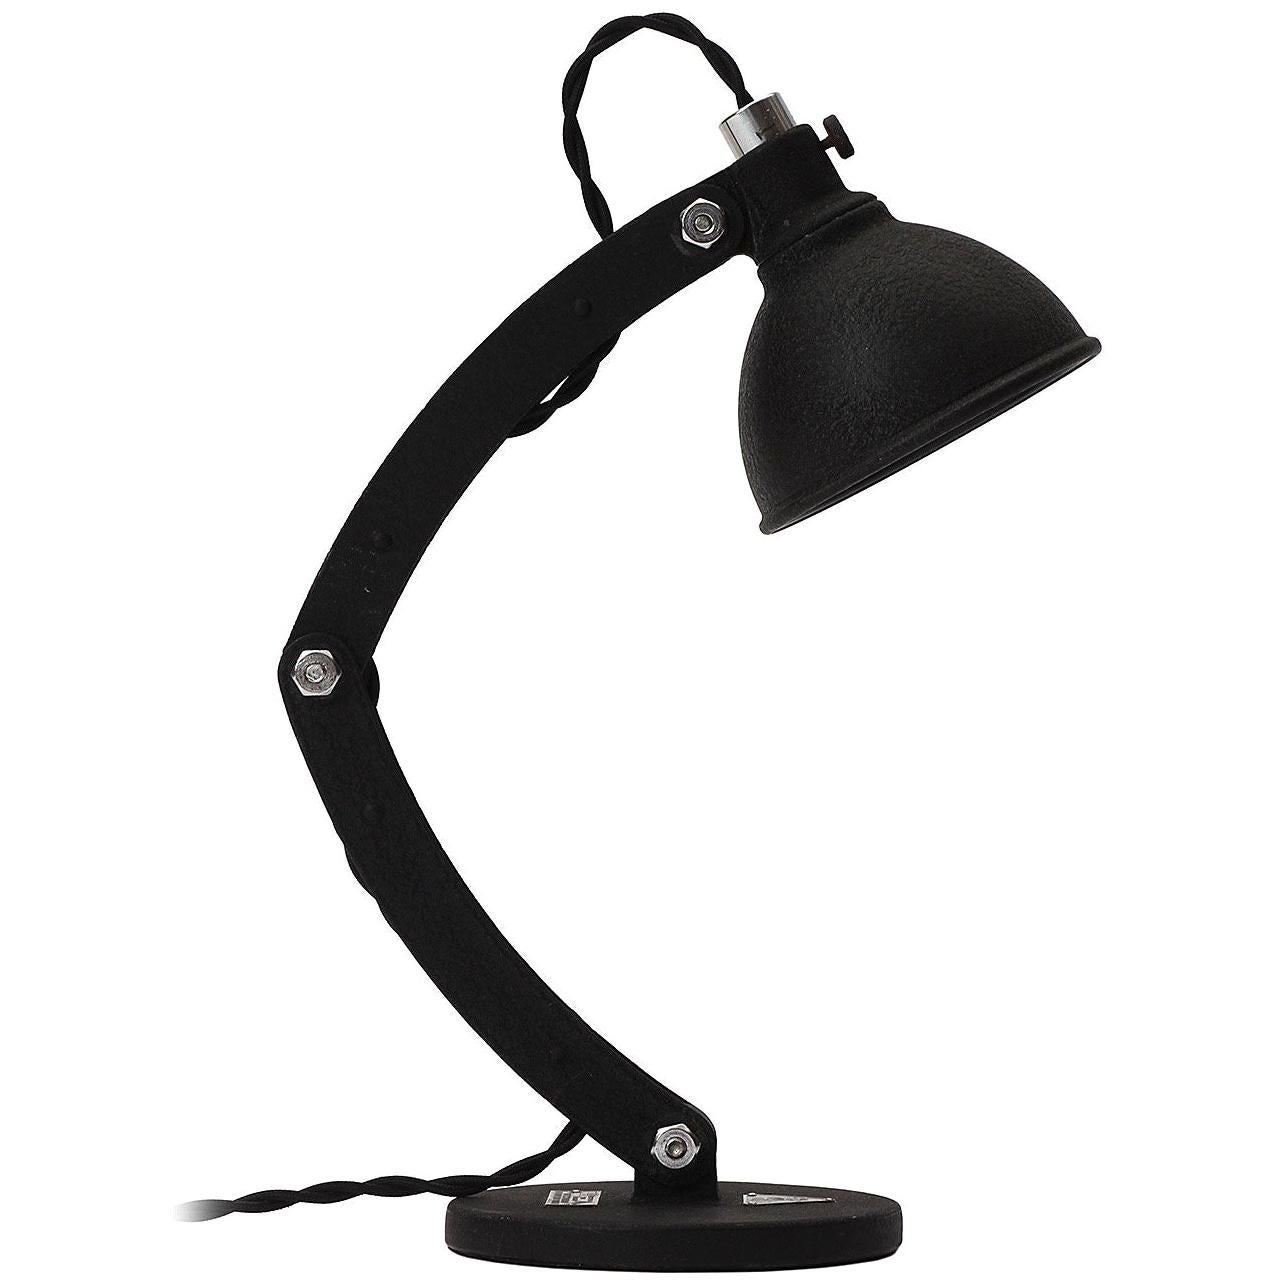 Articulated Lamp by Bausch & Lomb